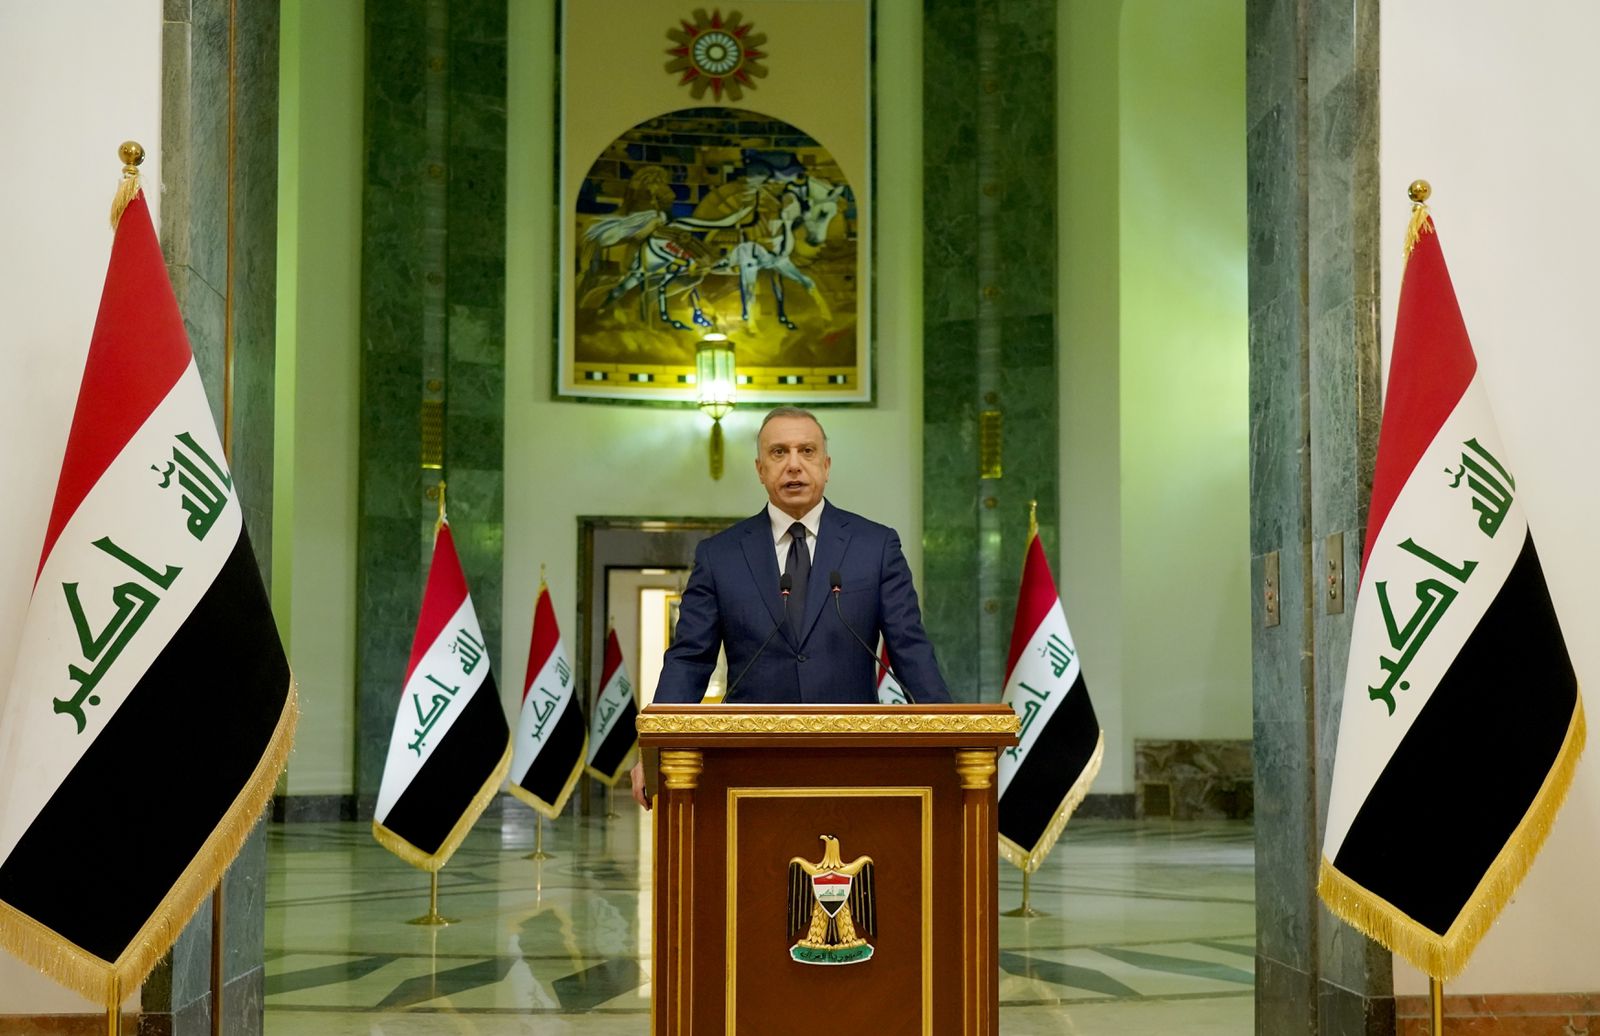 Iraq's PM: We will contribute to everything that helps stabilize the region